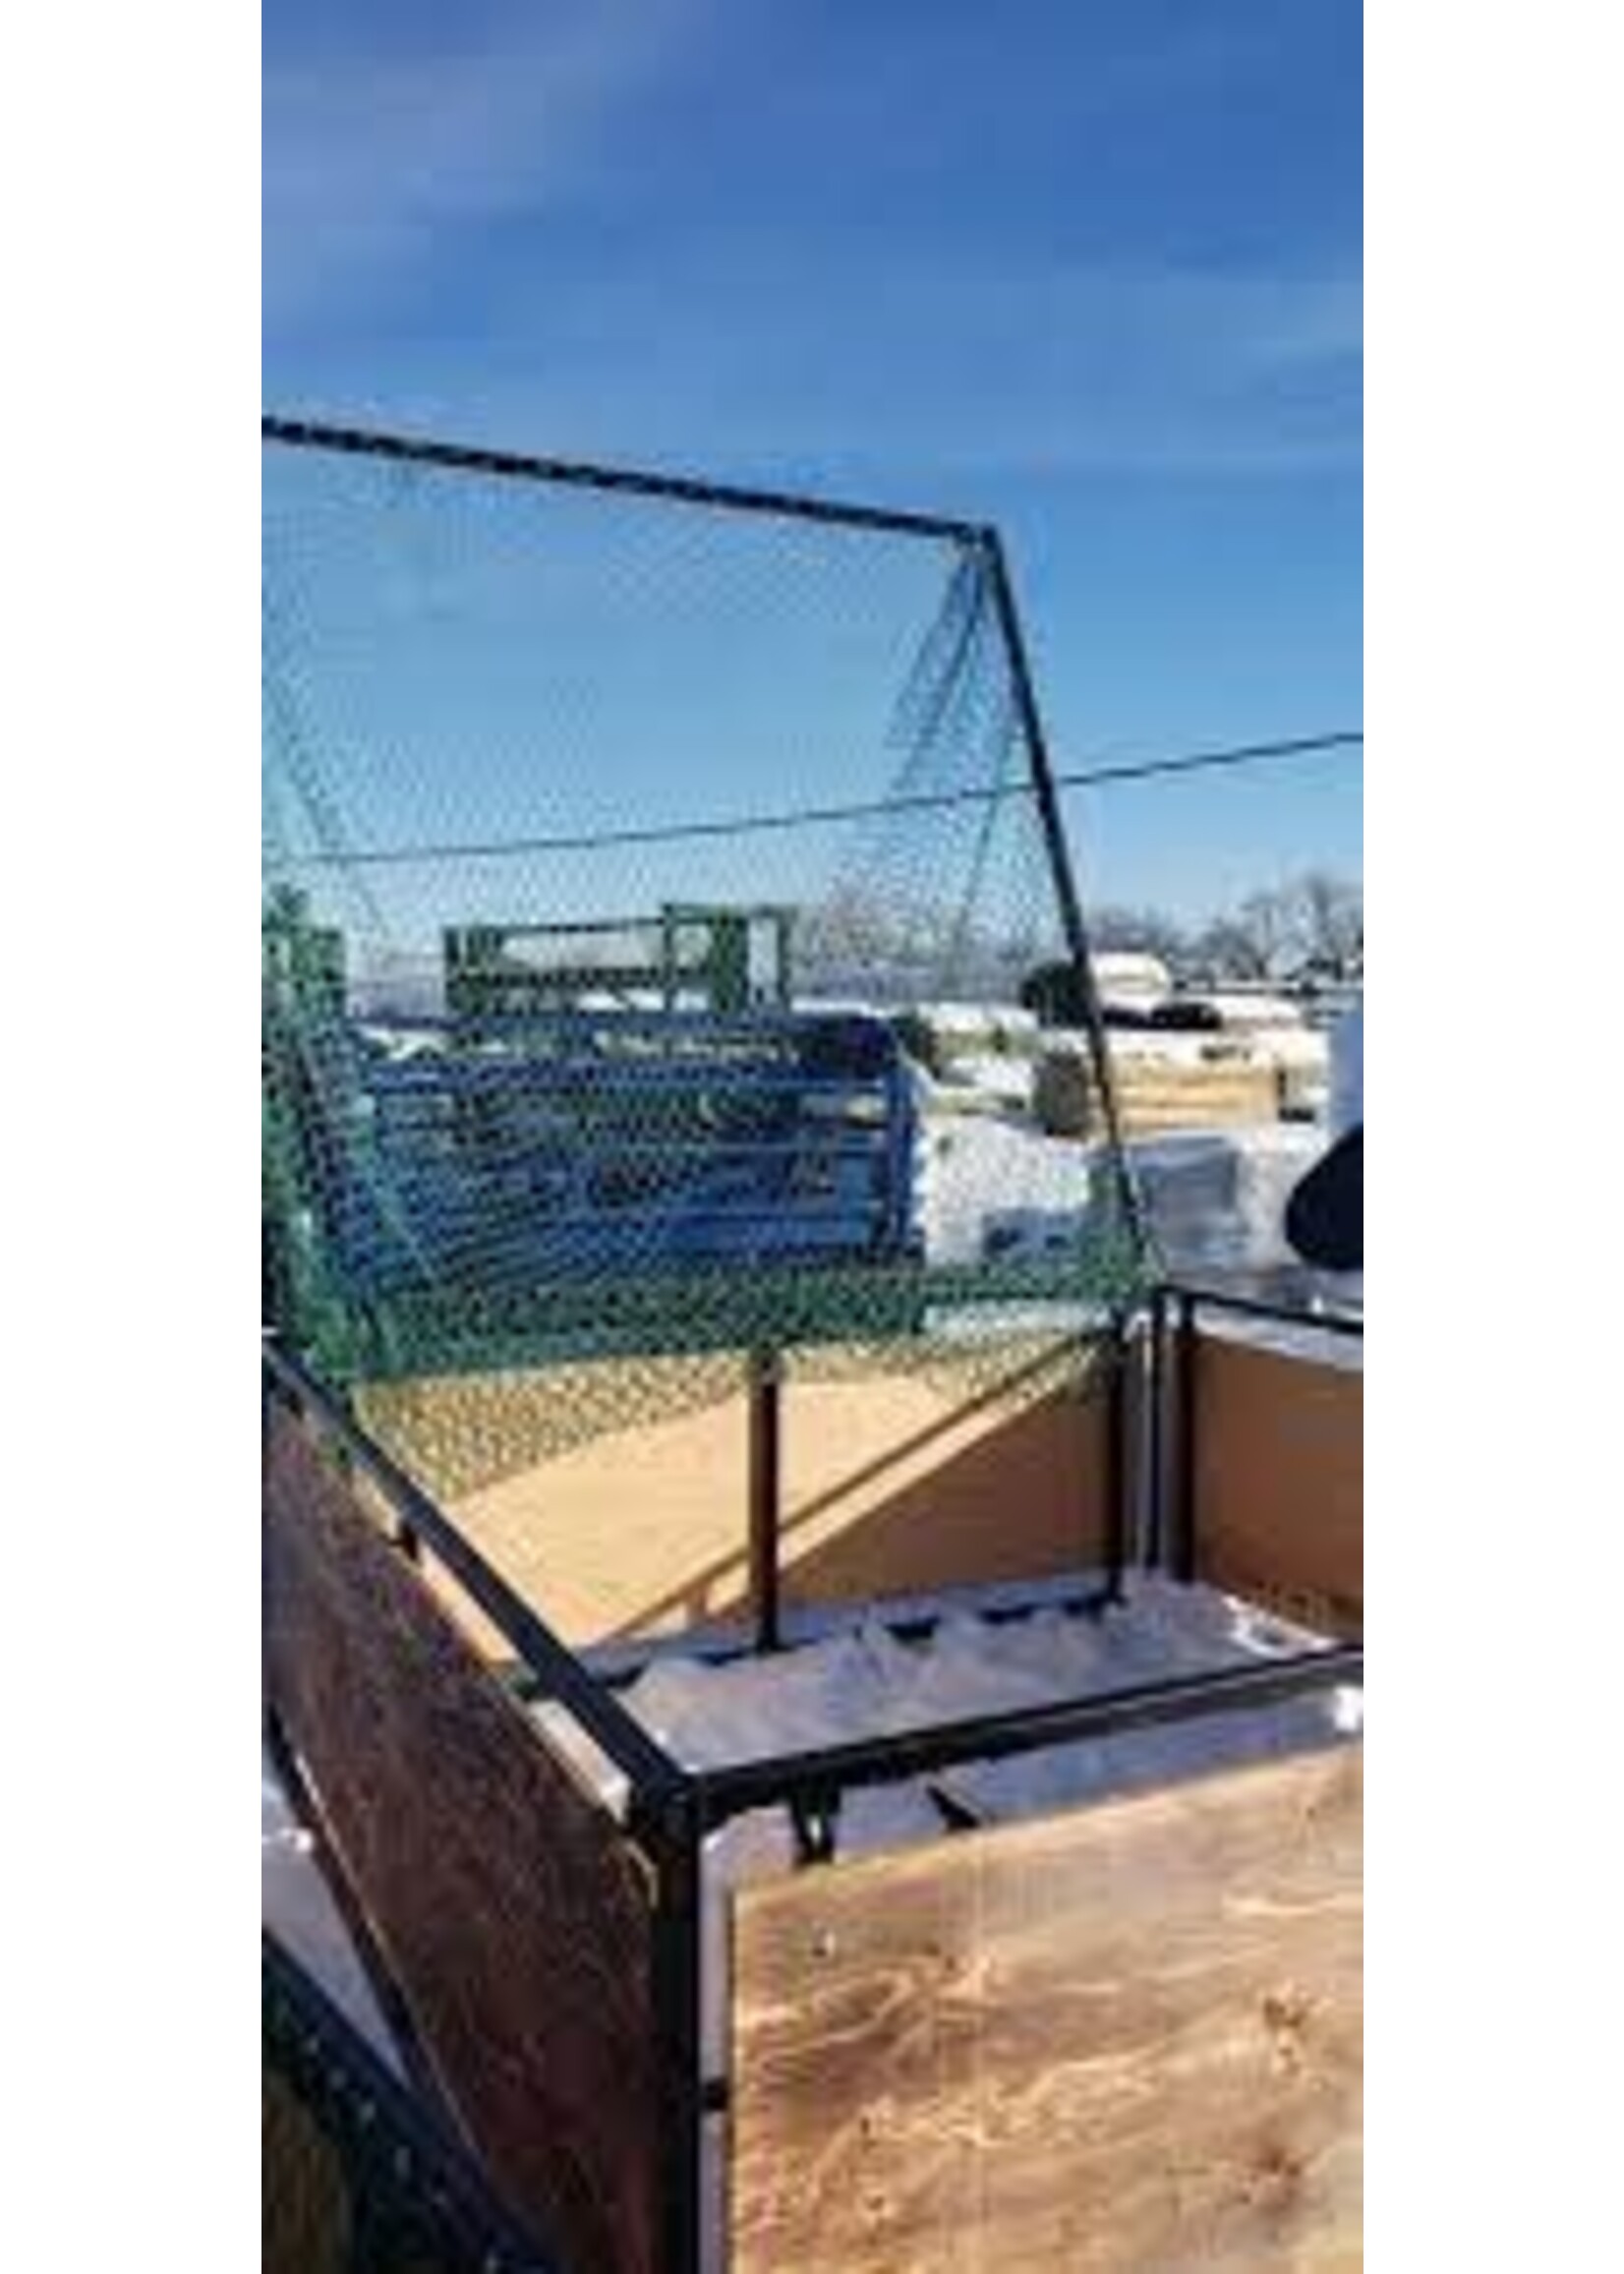 Large Round Bale Feeder with net - 7'x7'